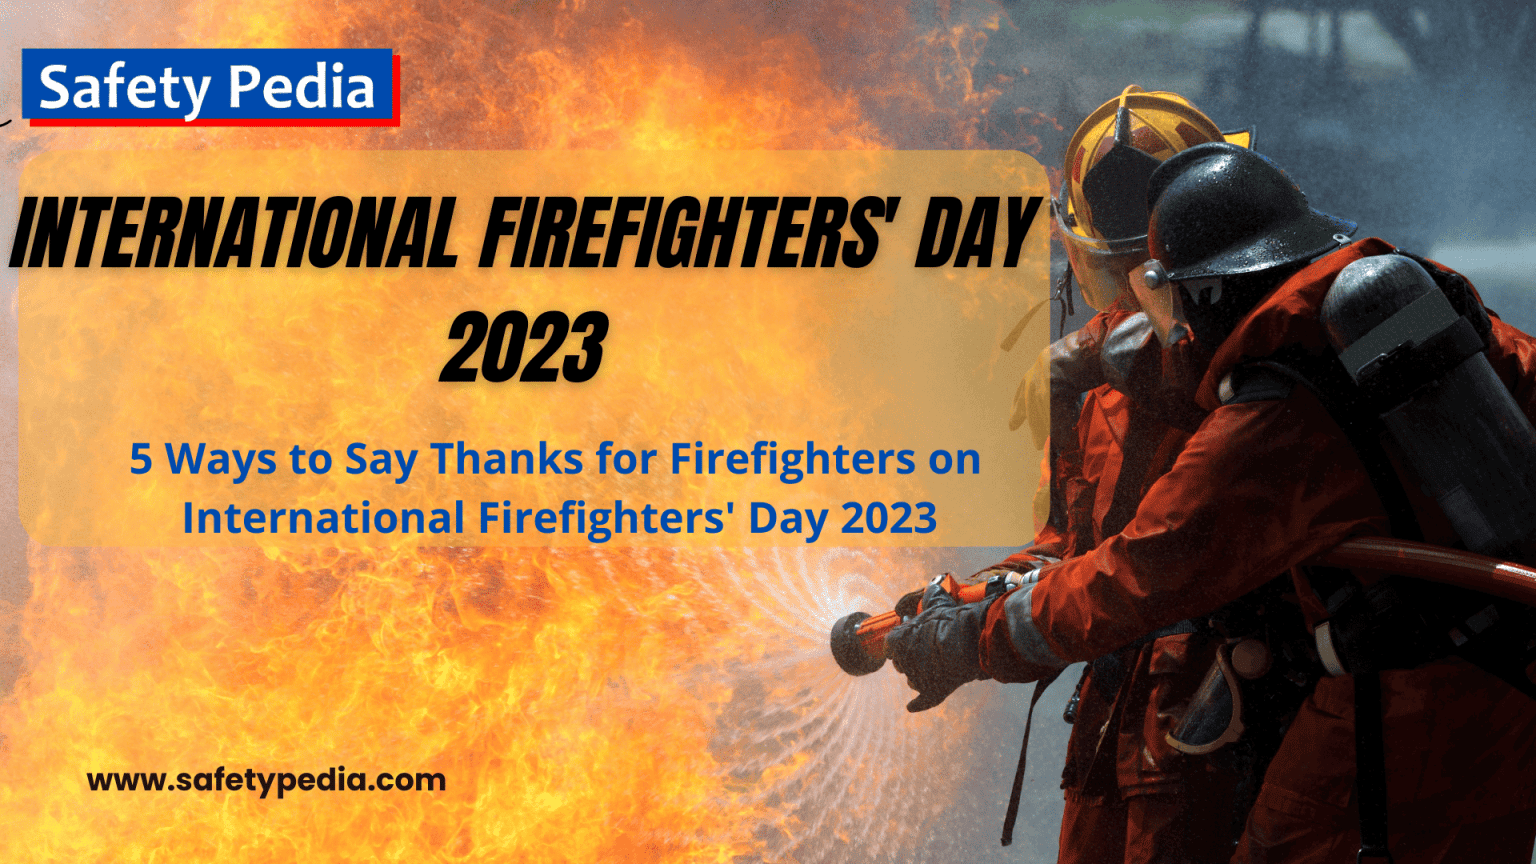 5 Ways to Say Thank you to Firefighters on International Firefighters